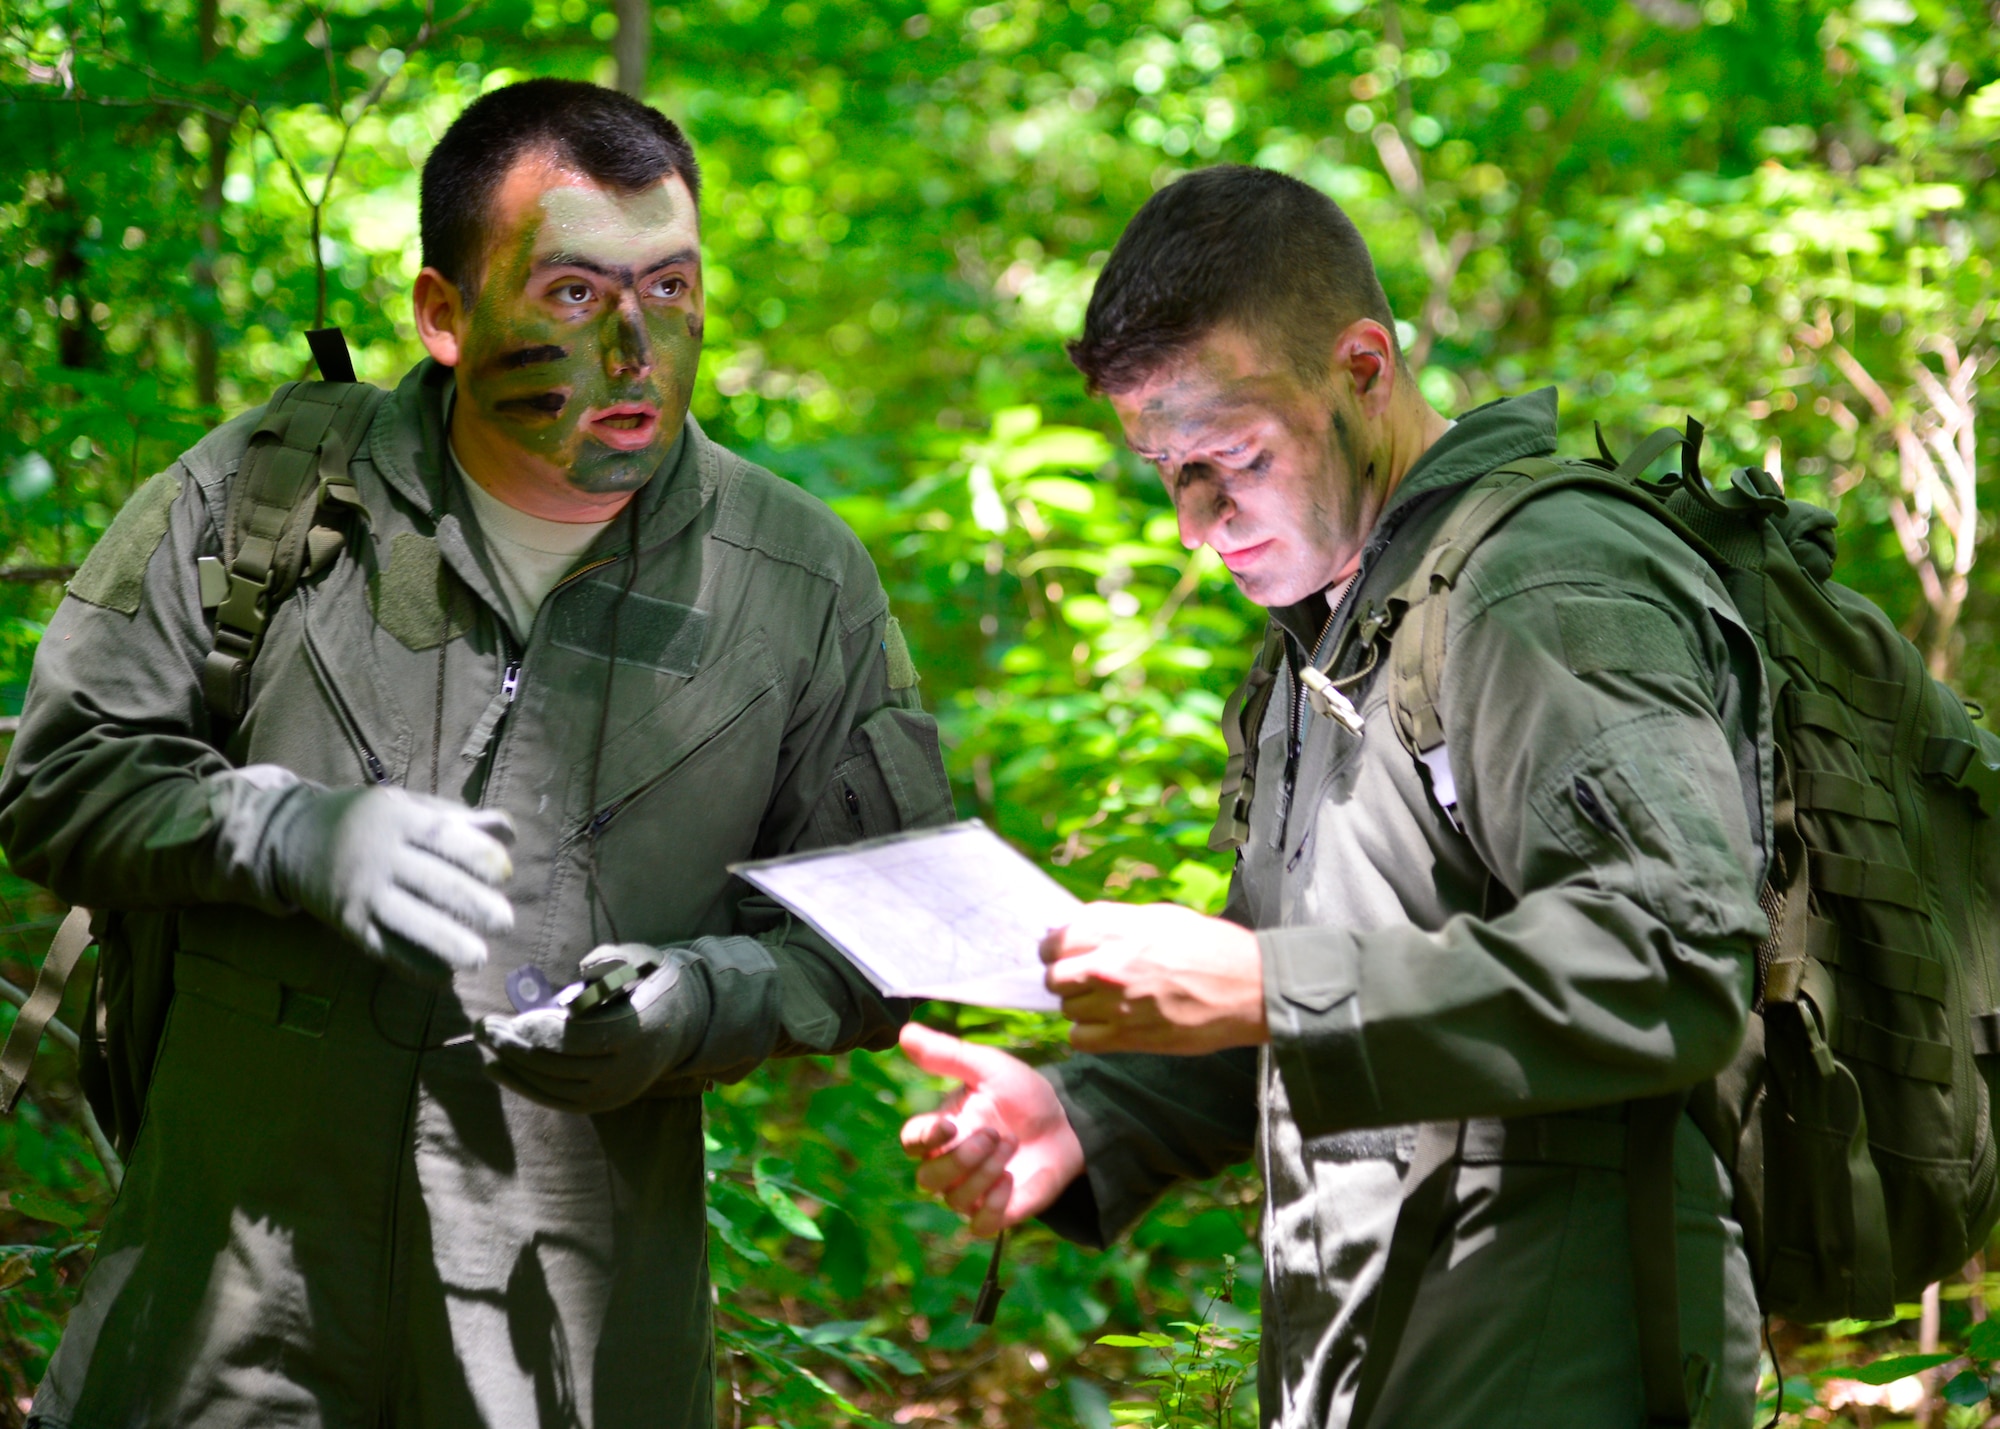 Senior Airman Leo Avila, 709th Airlift Squadron C-5M Super Galaxy engineer, left, and Senior Airman Dan Bates, 9th AS C-5M loadmaster, right, use a compass and a map to navigate to a checkpoint during a combat survival training exercise July 16, 2015, at the Blackbird State Forest near Smyrna, Del. Avila and Bates navigated with three other members of their team through several miles of forest to be rescued by friendly forces after escaping from enemy combatants. (U.S. Air Force photo/Airman 1st Class William Johnson)